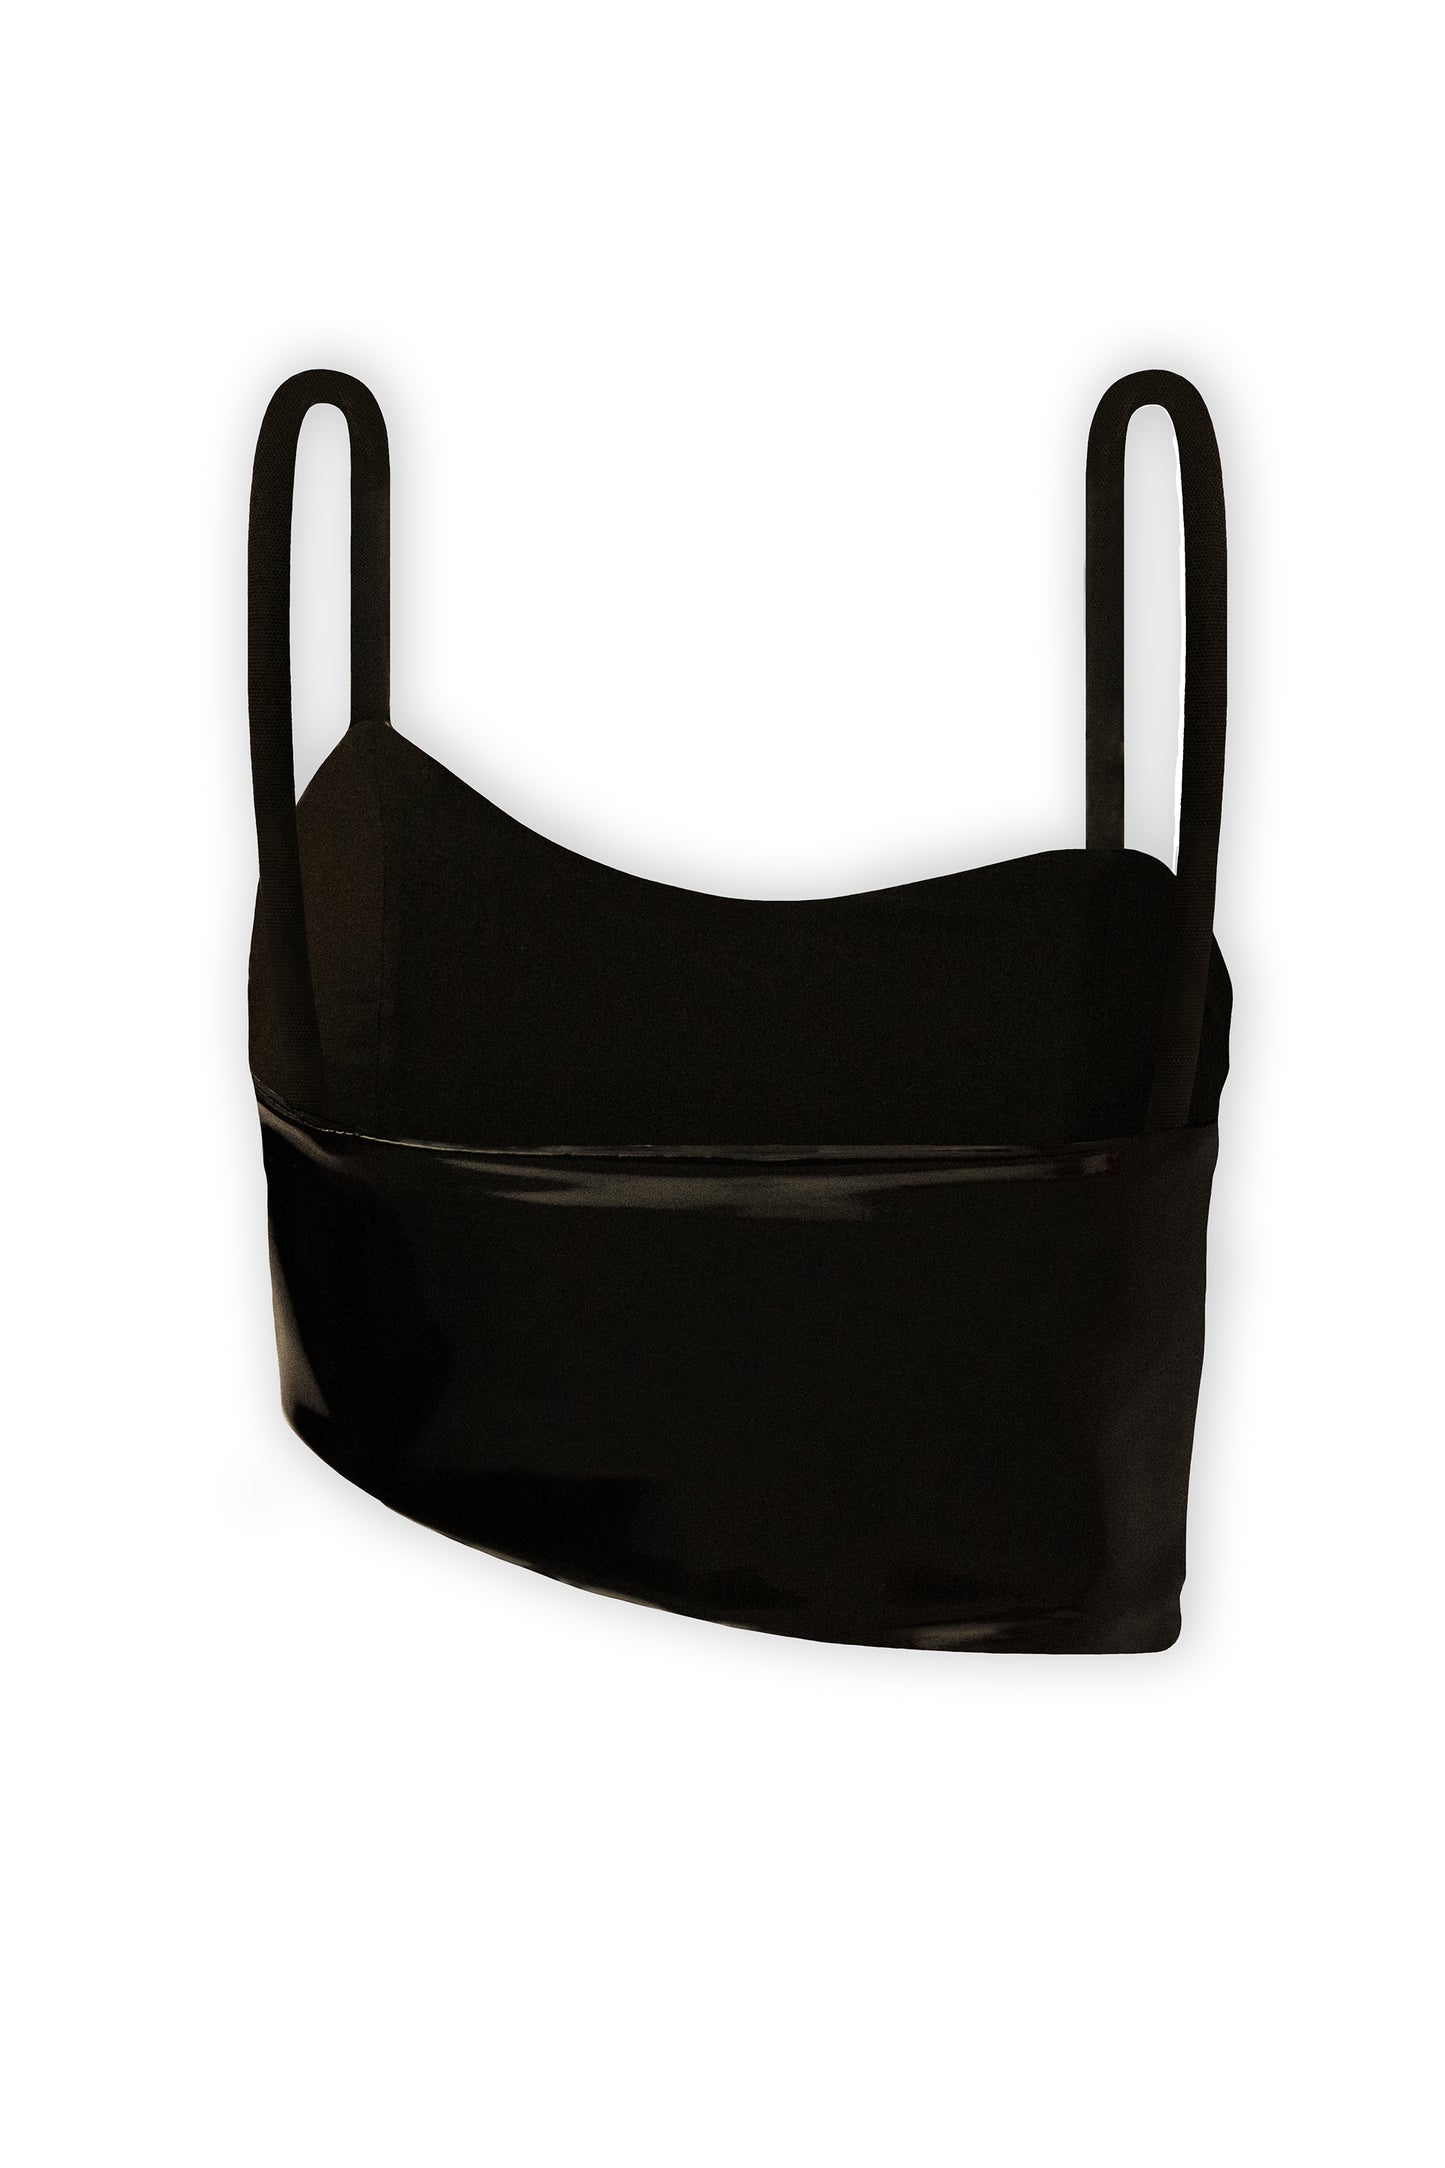 The photograph presents a black asymmetric crop top with rope straps. It is made from 100% eco leather, closed with soft lining. The asymmetric crop top photograph is from the back on a white background.